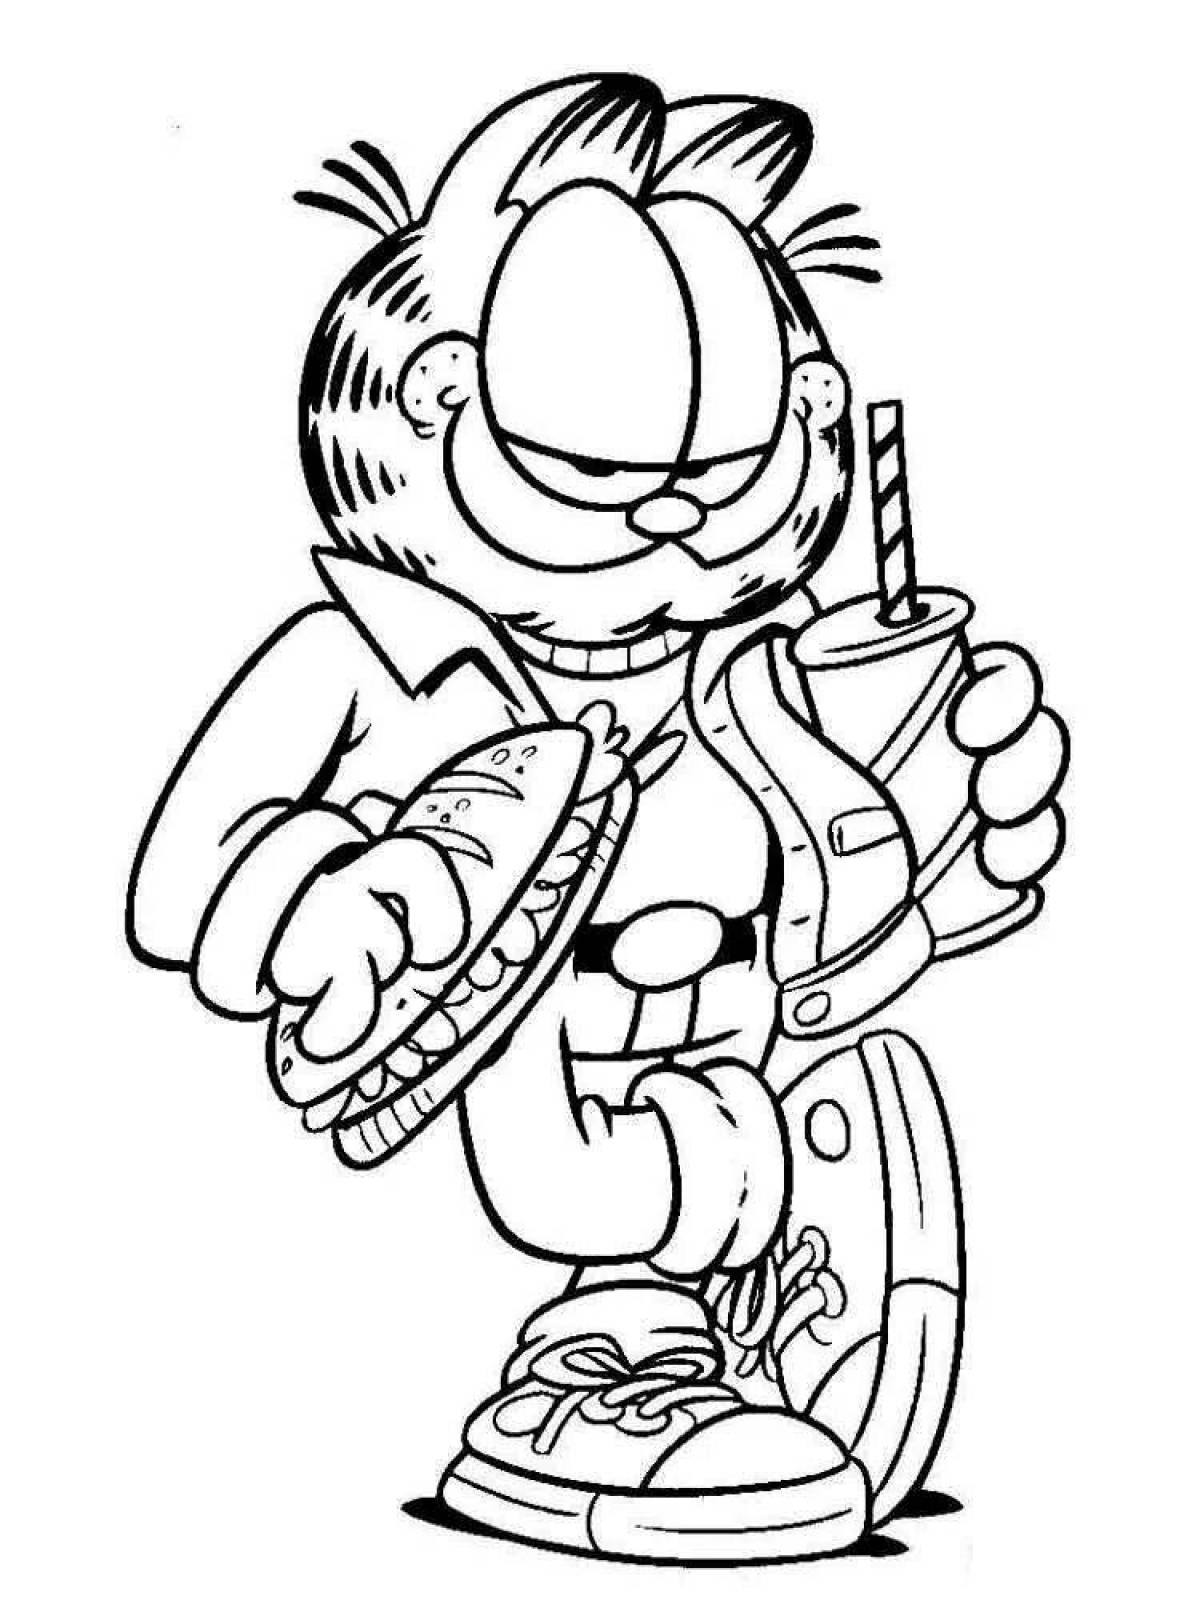 Attractive garfield cat coloring page